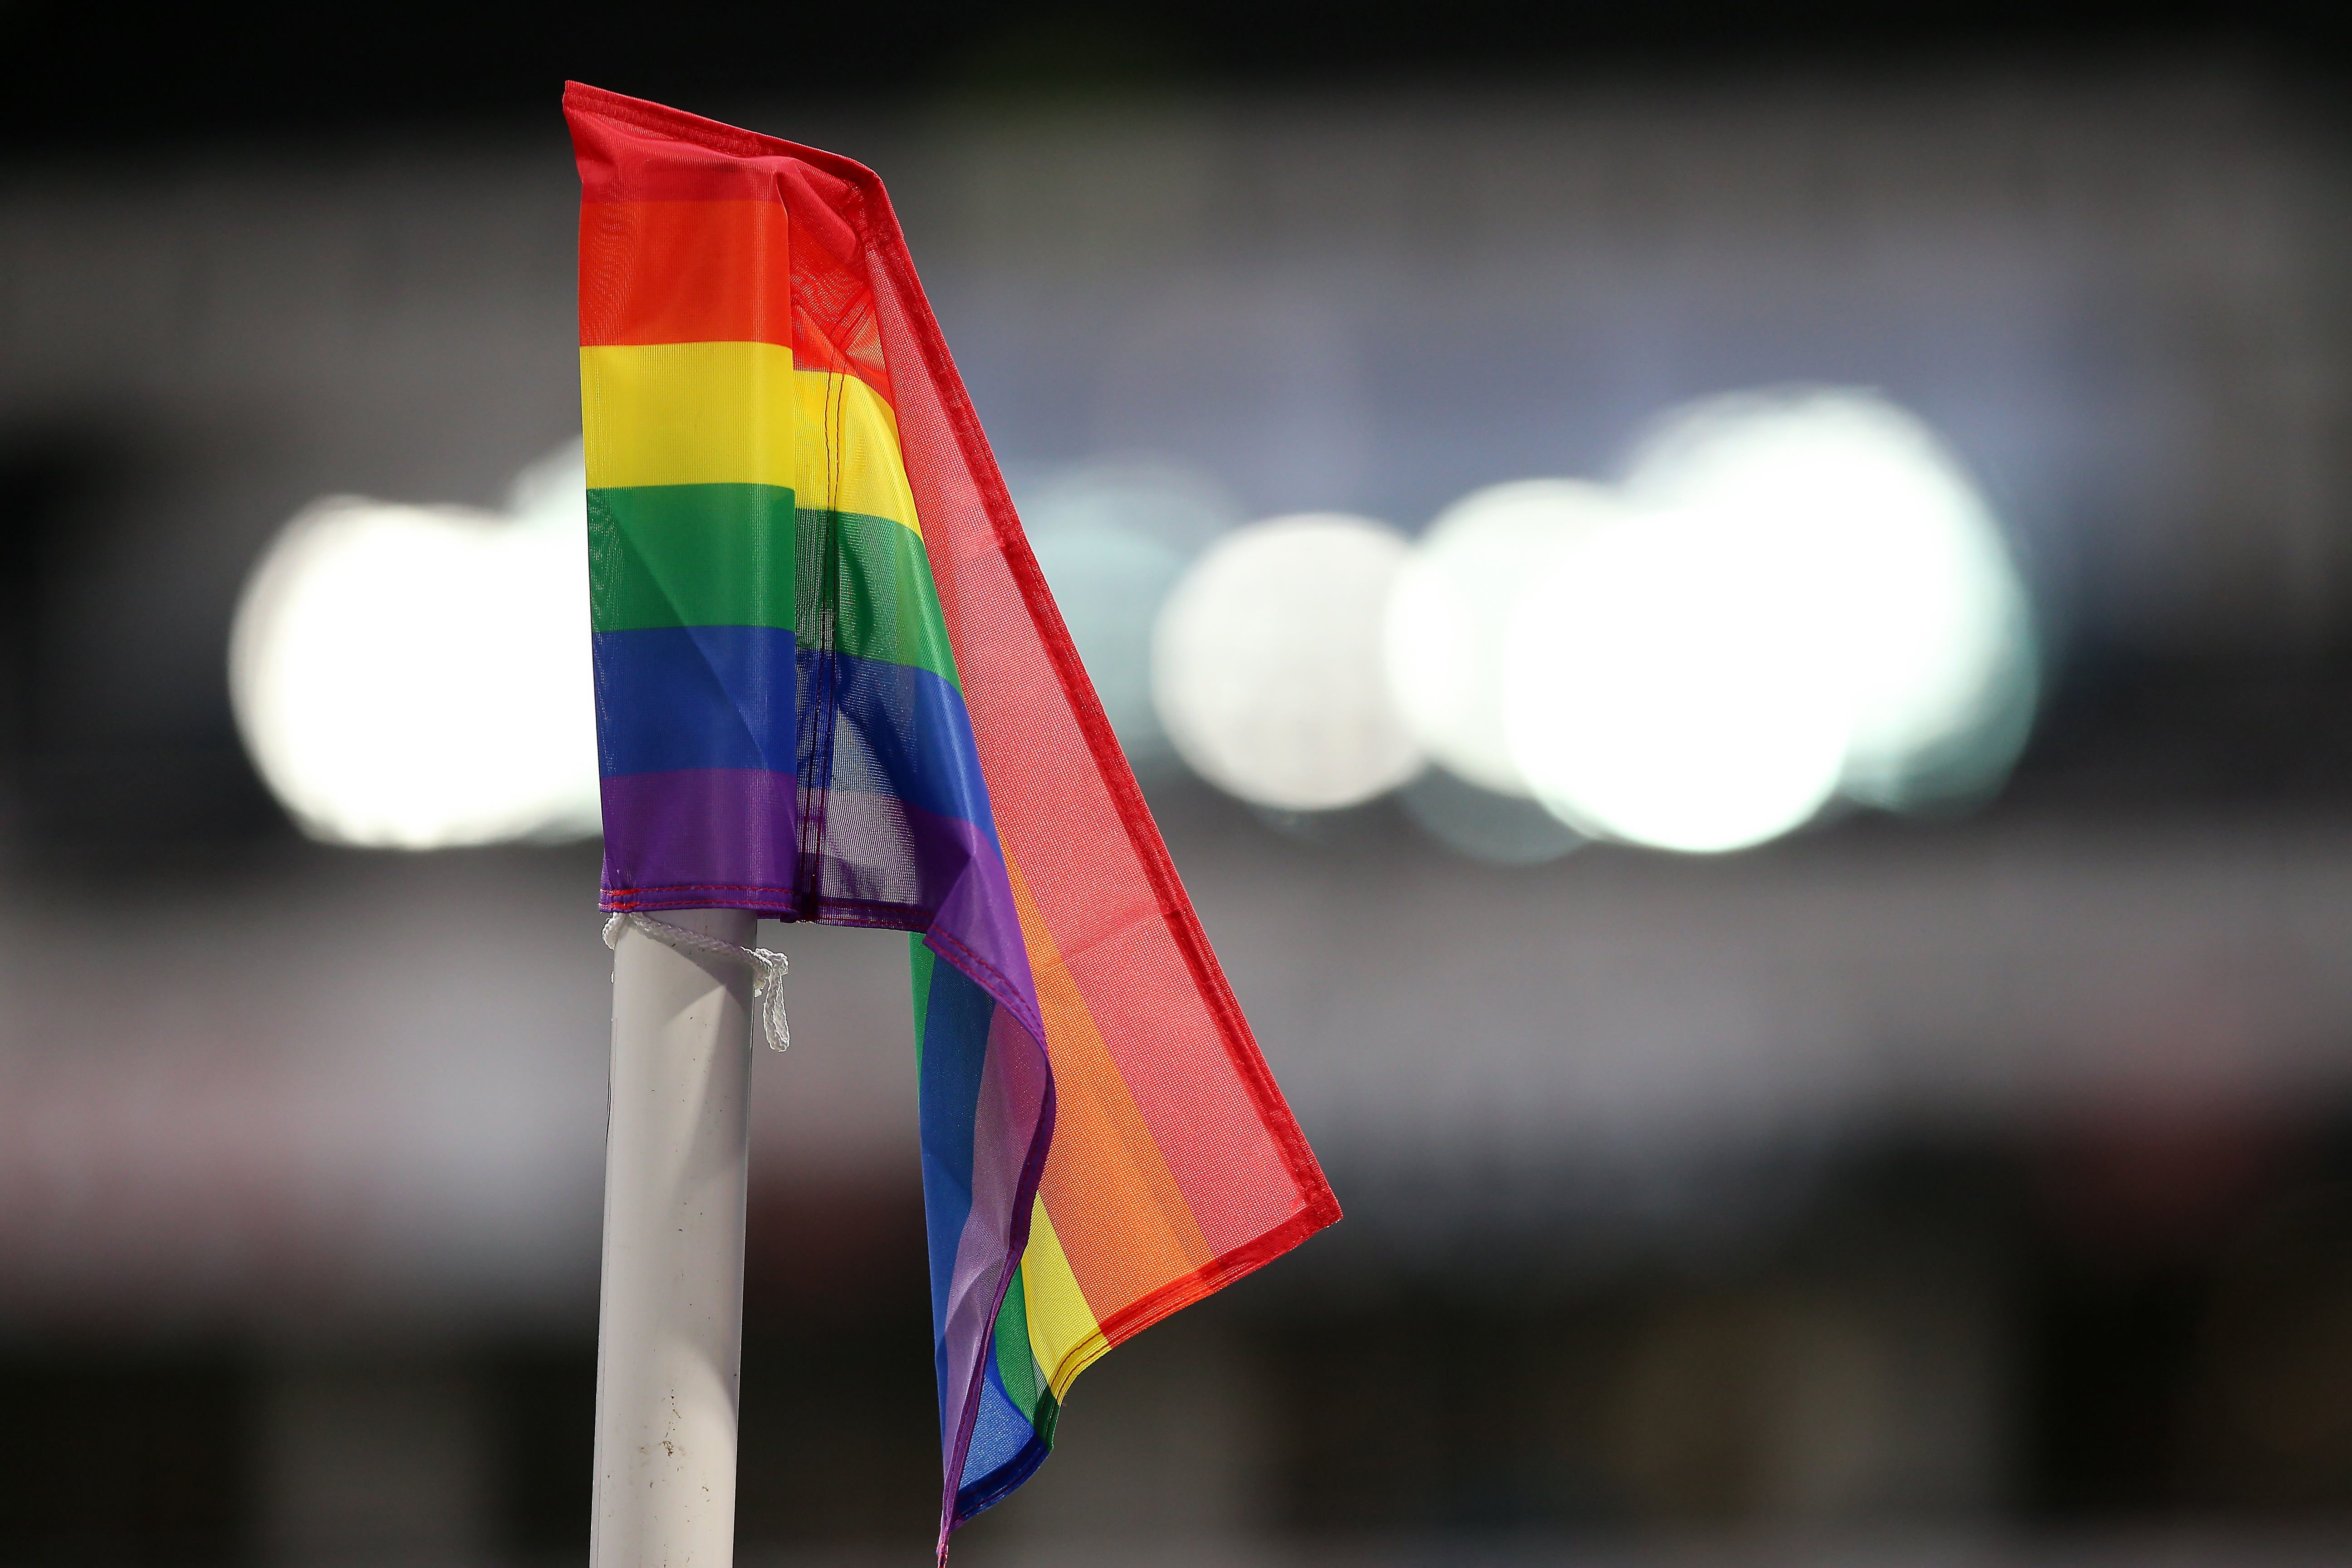 Adelaide United midfielder Josh Cavallo came out as gay last month